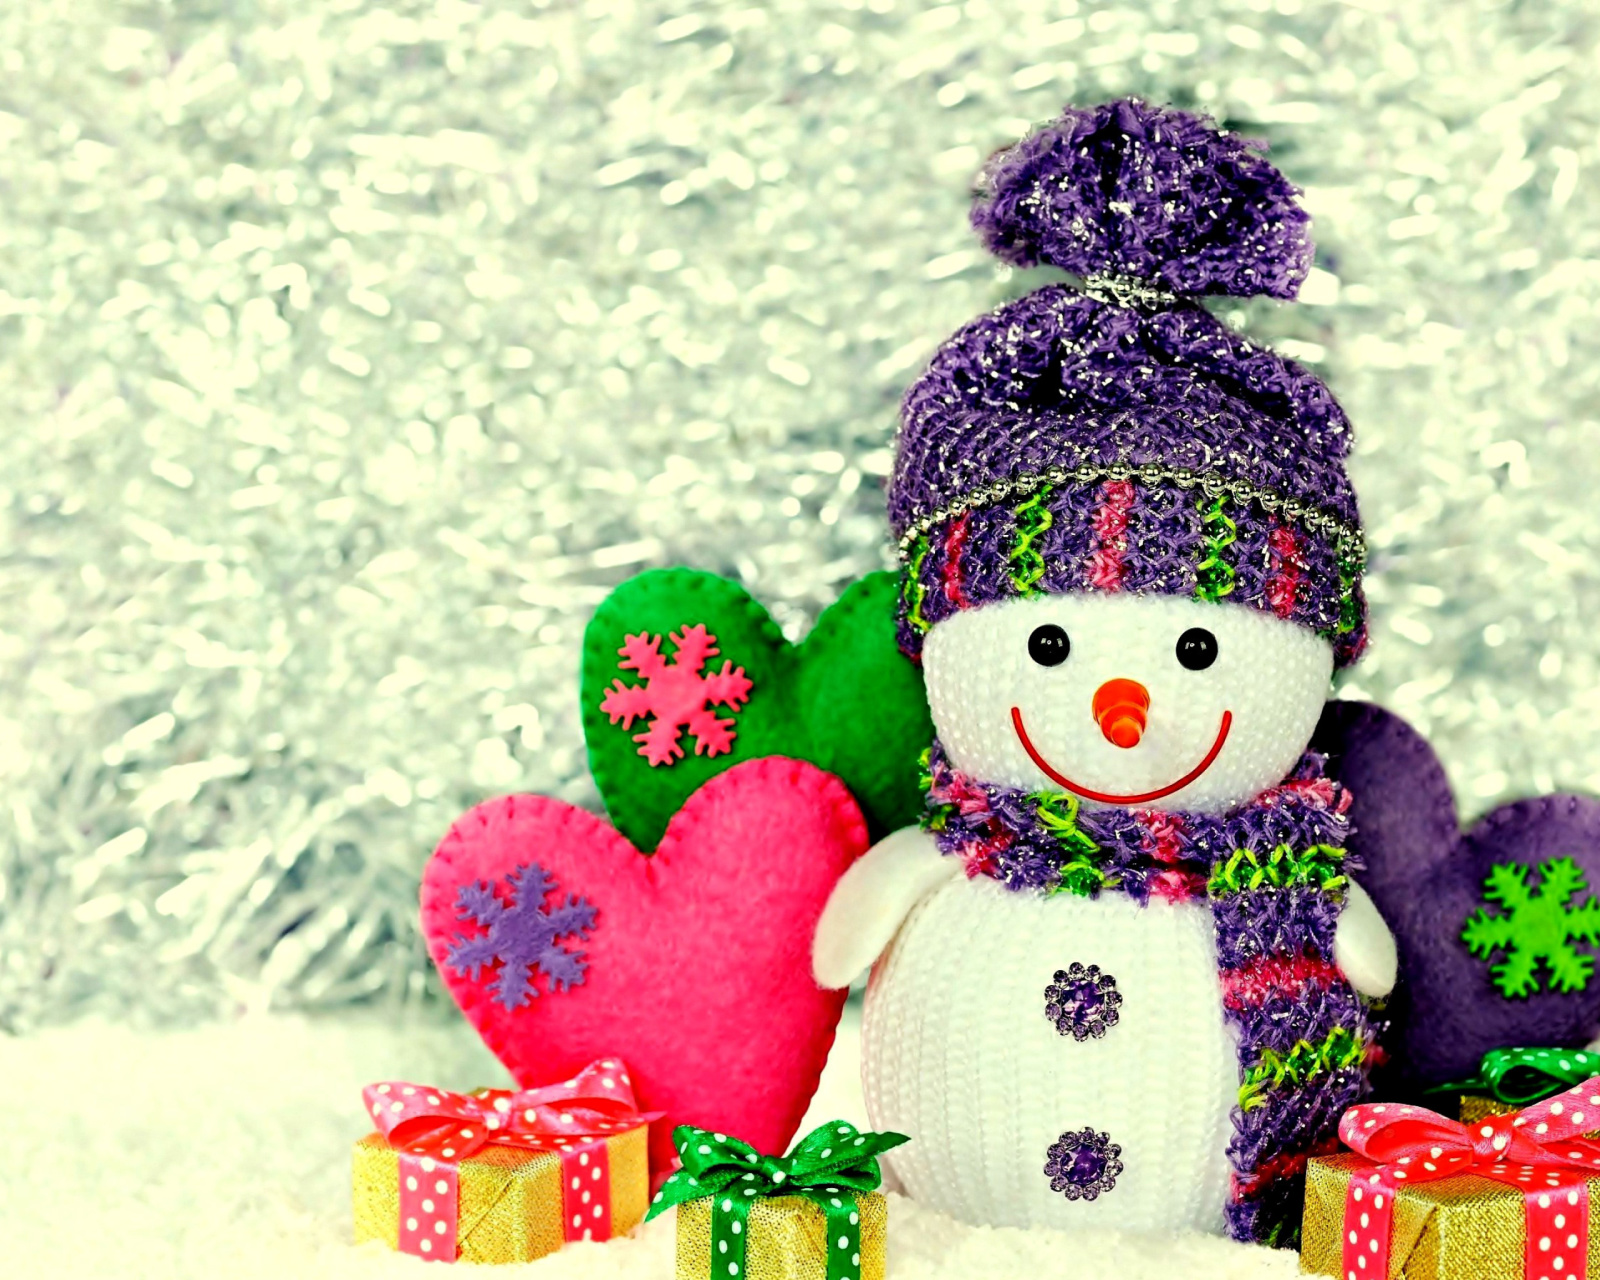 Homemade Snowman with Gifts wallpaper 1600x1280